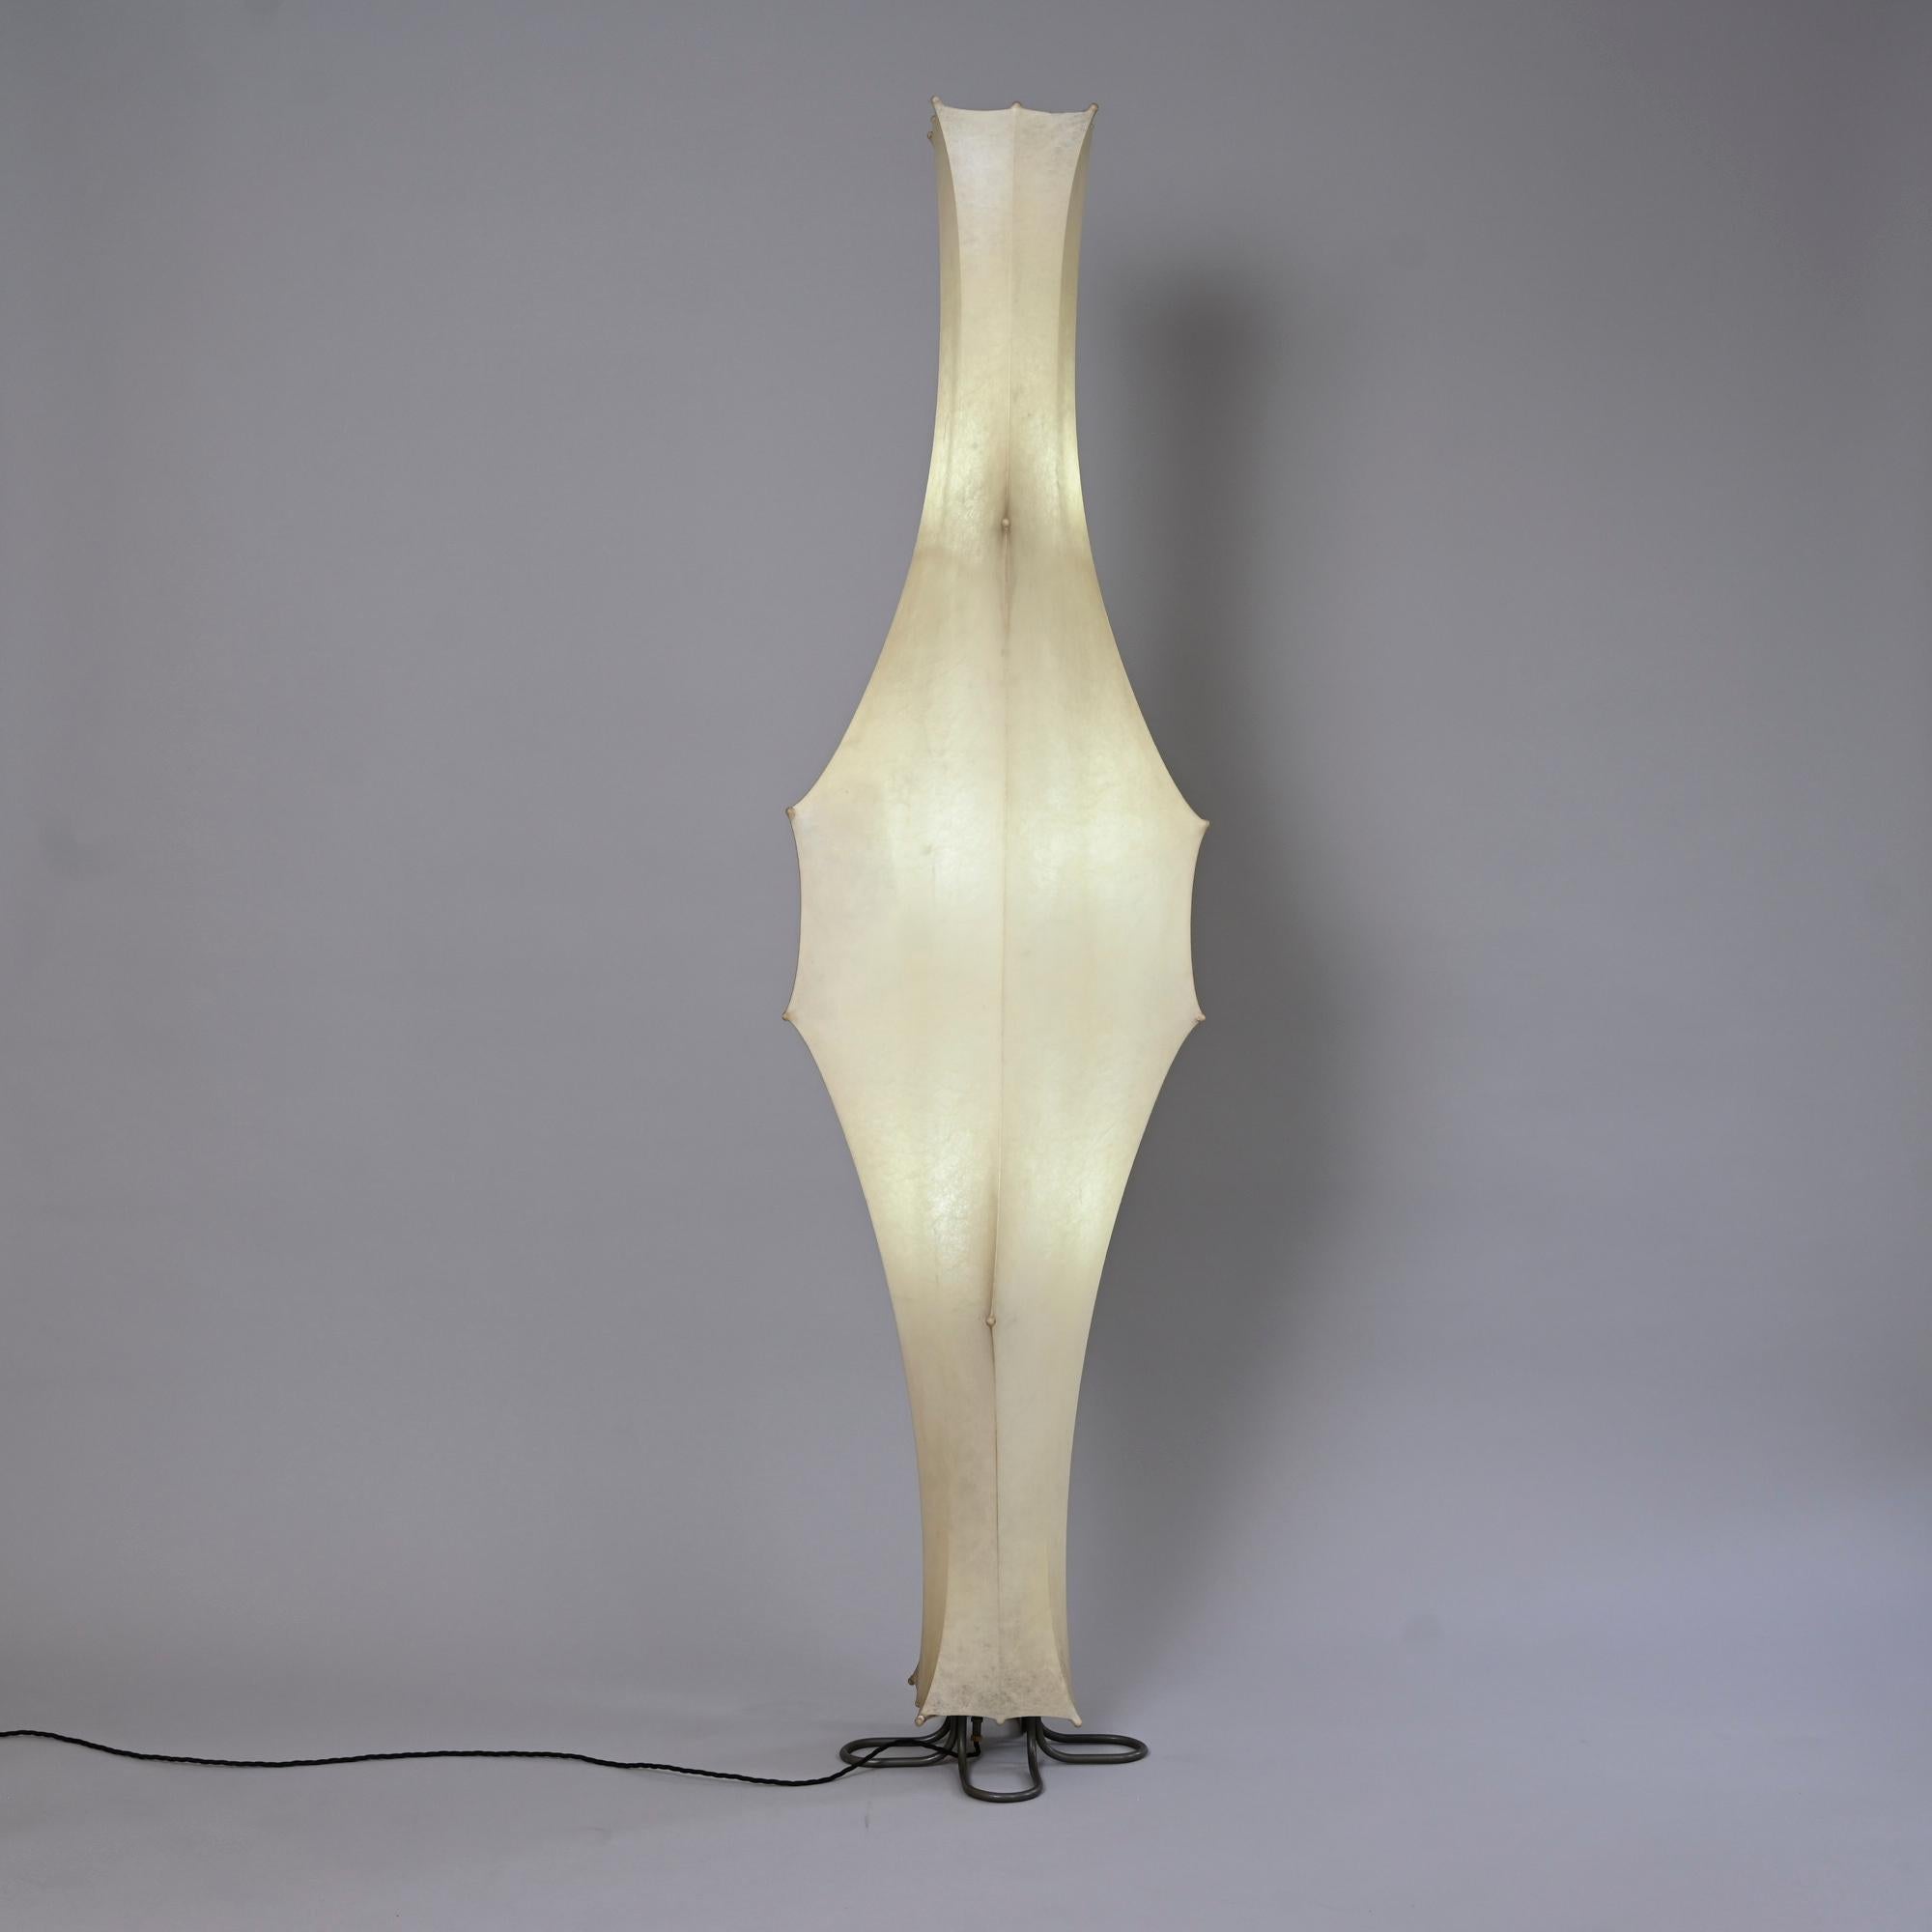 Original Fantasma light (Ghost), resin cocoon floor lamp by Tobia Scarpa for Flos, 1963.

Beautiful sculptural light. Ghost light because it evokes the shape and glow of a ghost at night...

Takes 3 x ES E27 bulbs. 

